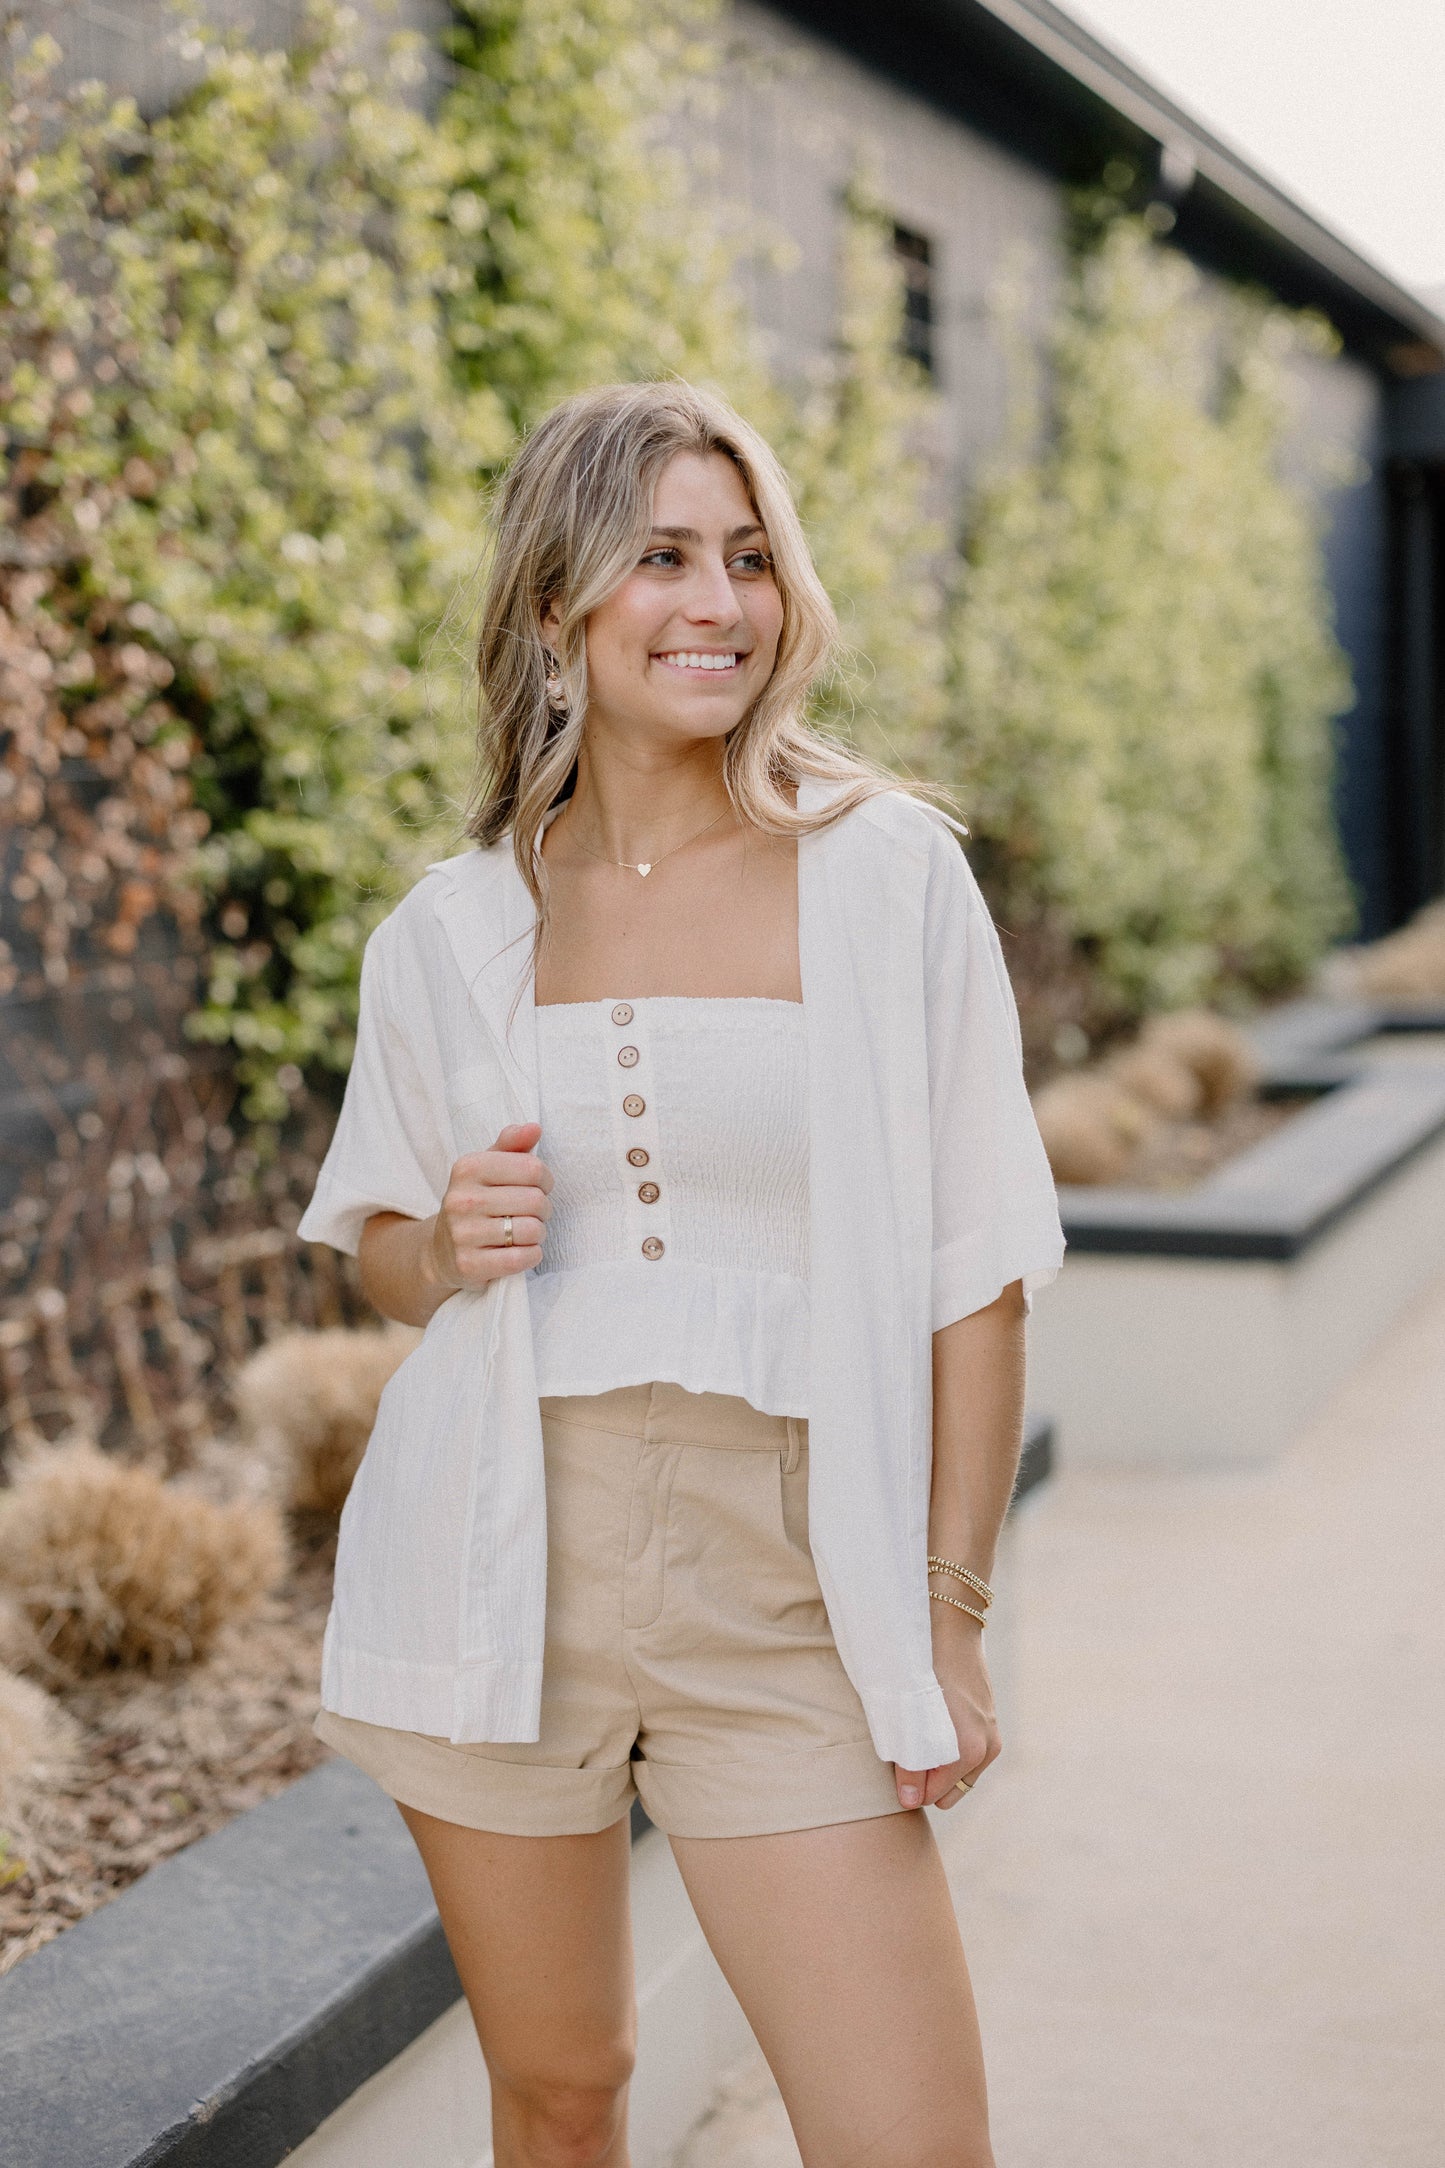 Laura Smocked Linen Top in Ivory by Bali Lane (Sizes S-3XL)